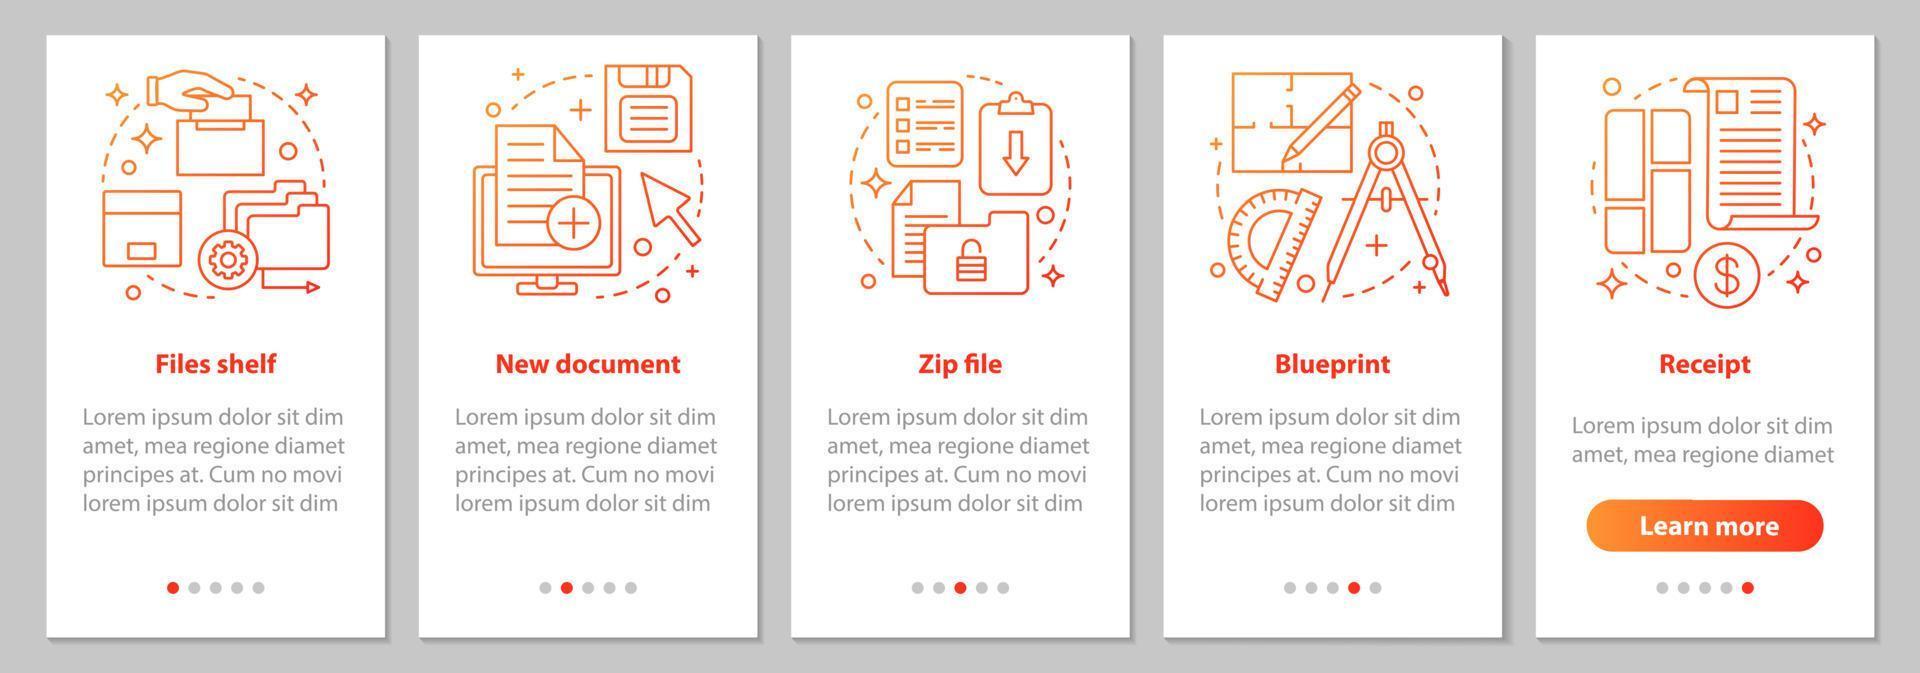 Big data onboarding mobile app page screen with linear concepts. Files storage, new document, zip file, blueprint, receipt steps graphic instructions. UX, UI, GUI vector template with illustrations